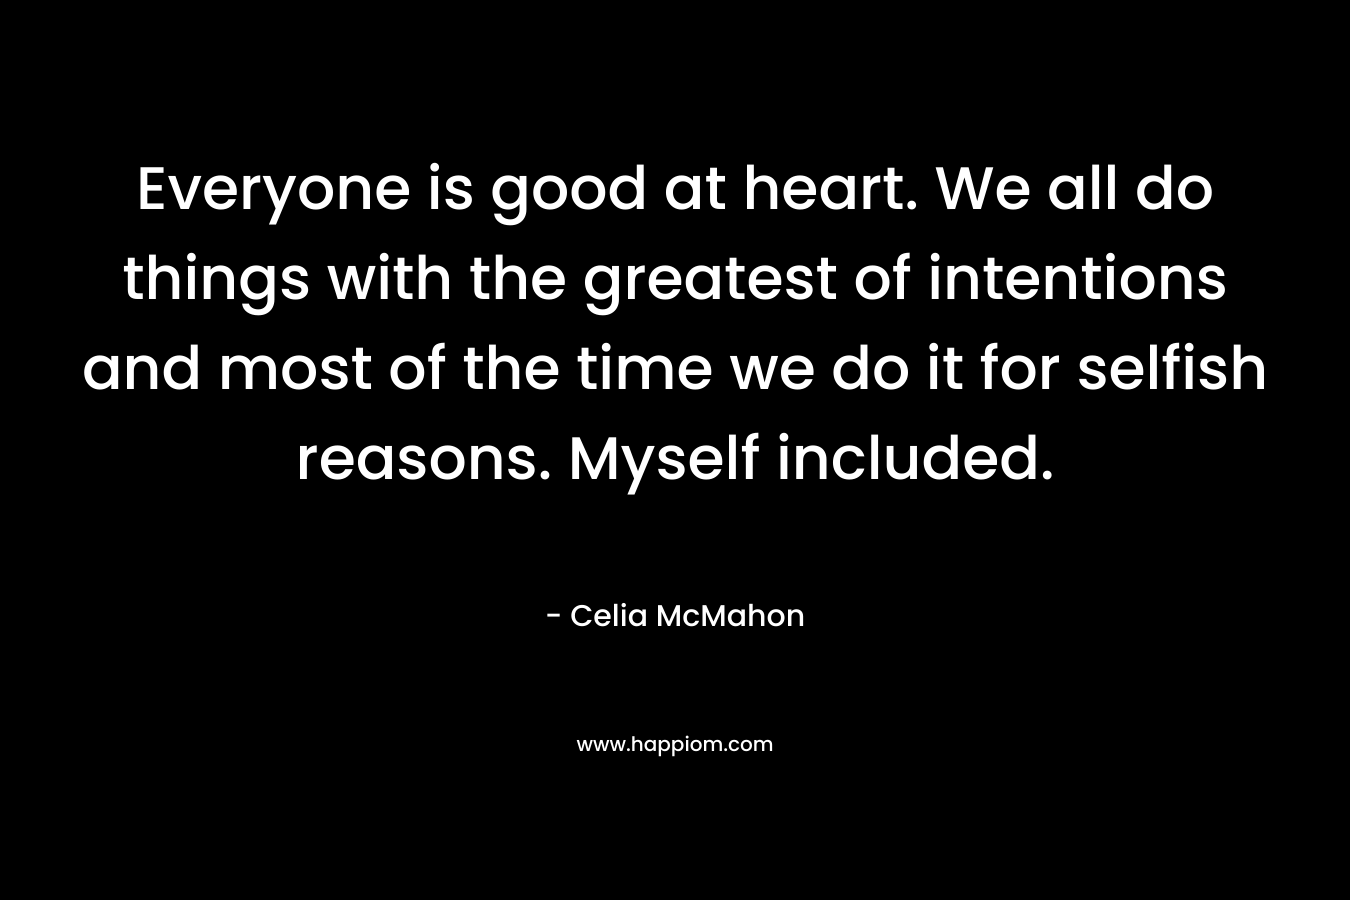 Everyone is good at heart. We all do things with the greatest of intentions and most of the time we do it for selfish reasons. Myself included. – Celia McMahon